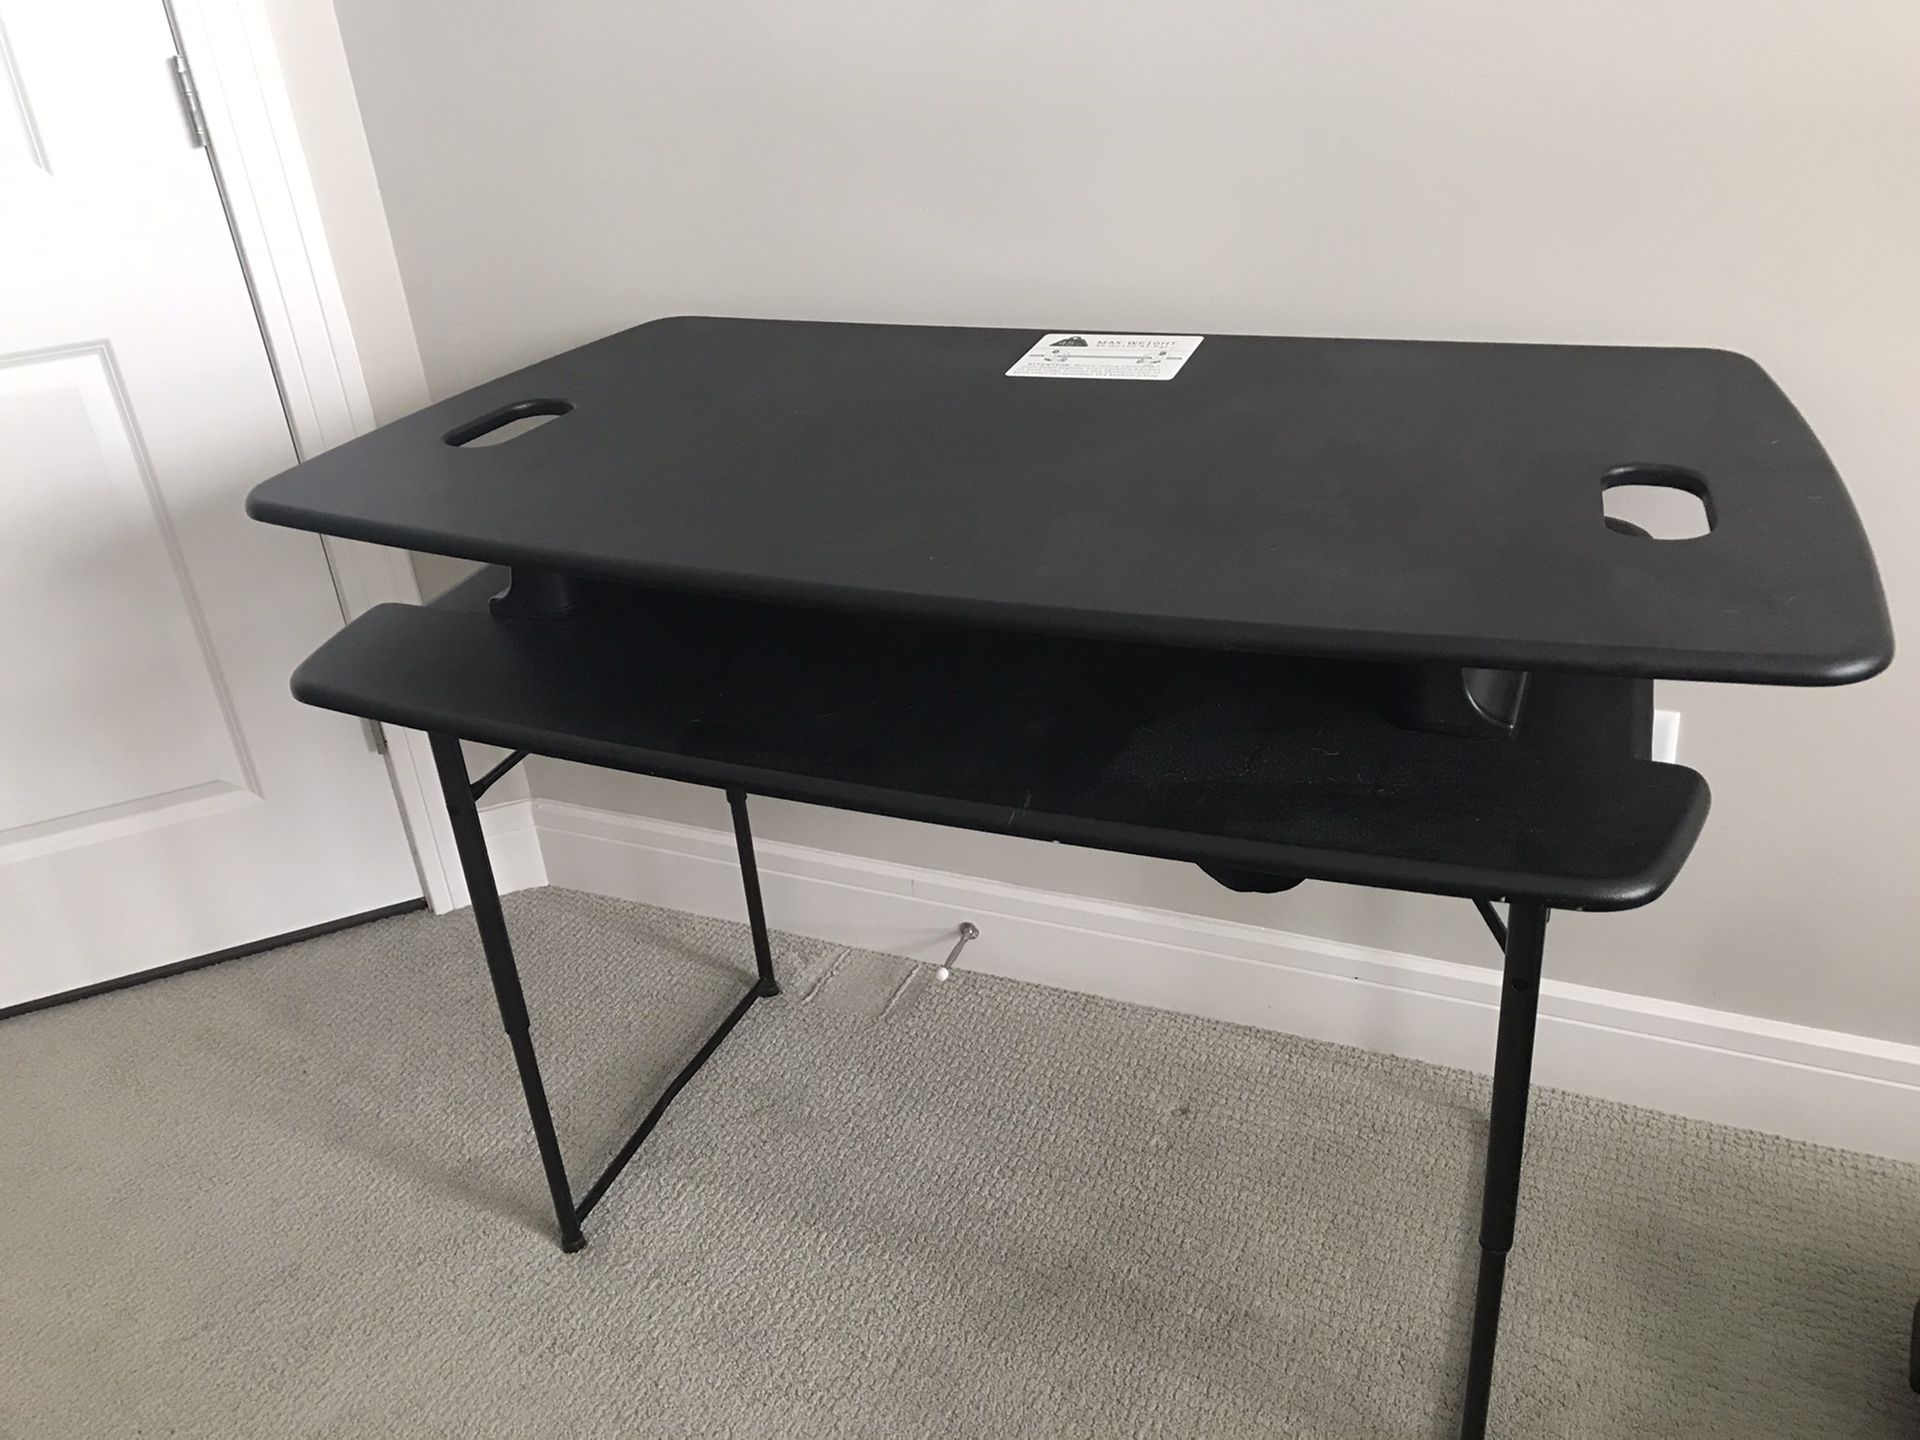 Pro 48 inches adjustable standing desk